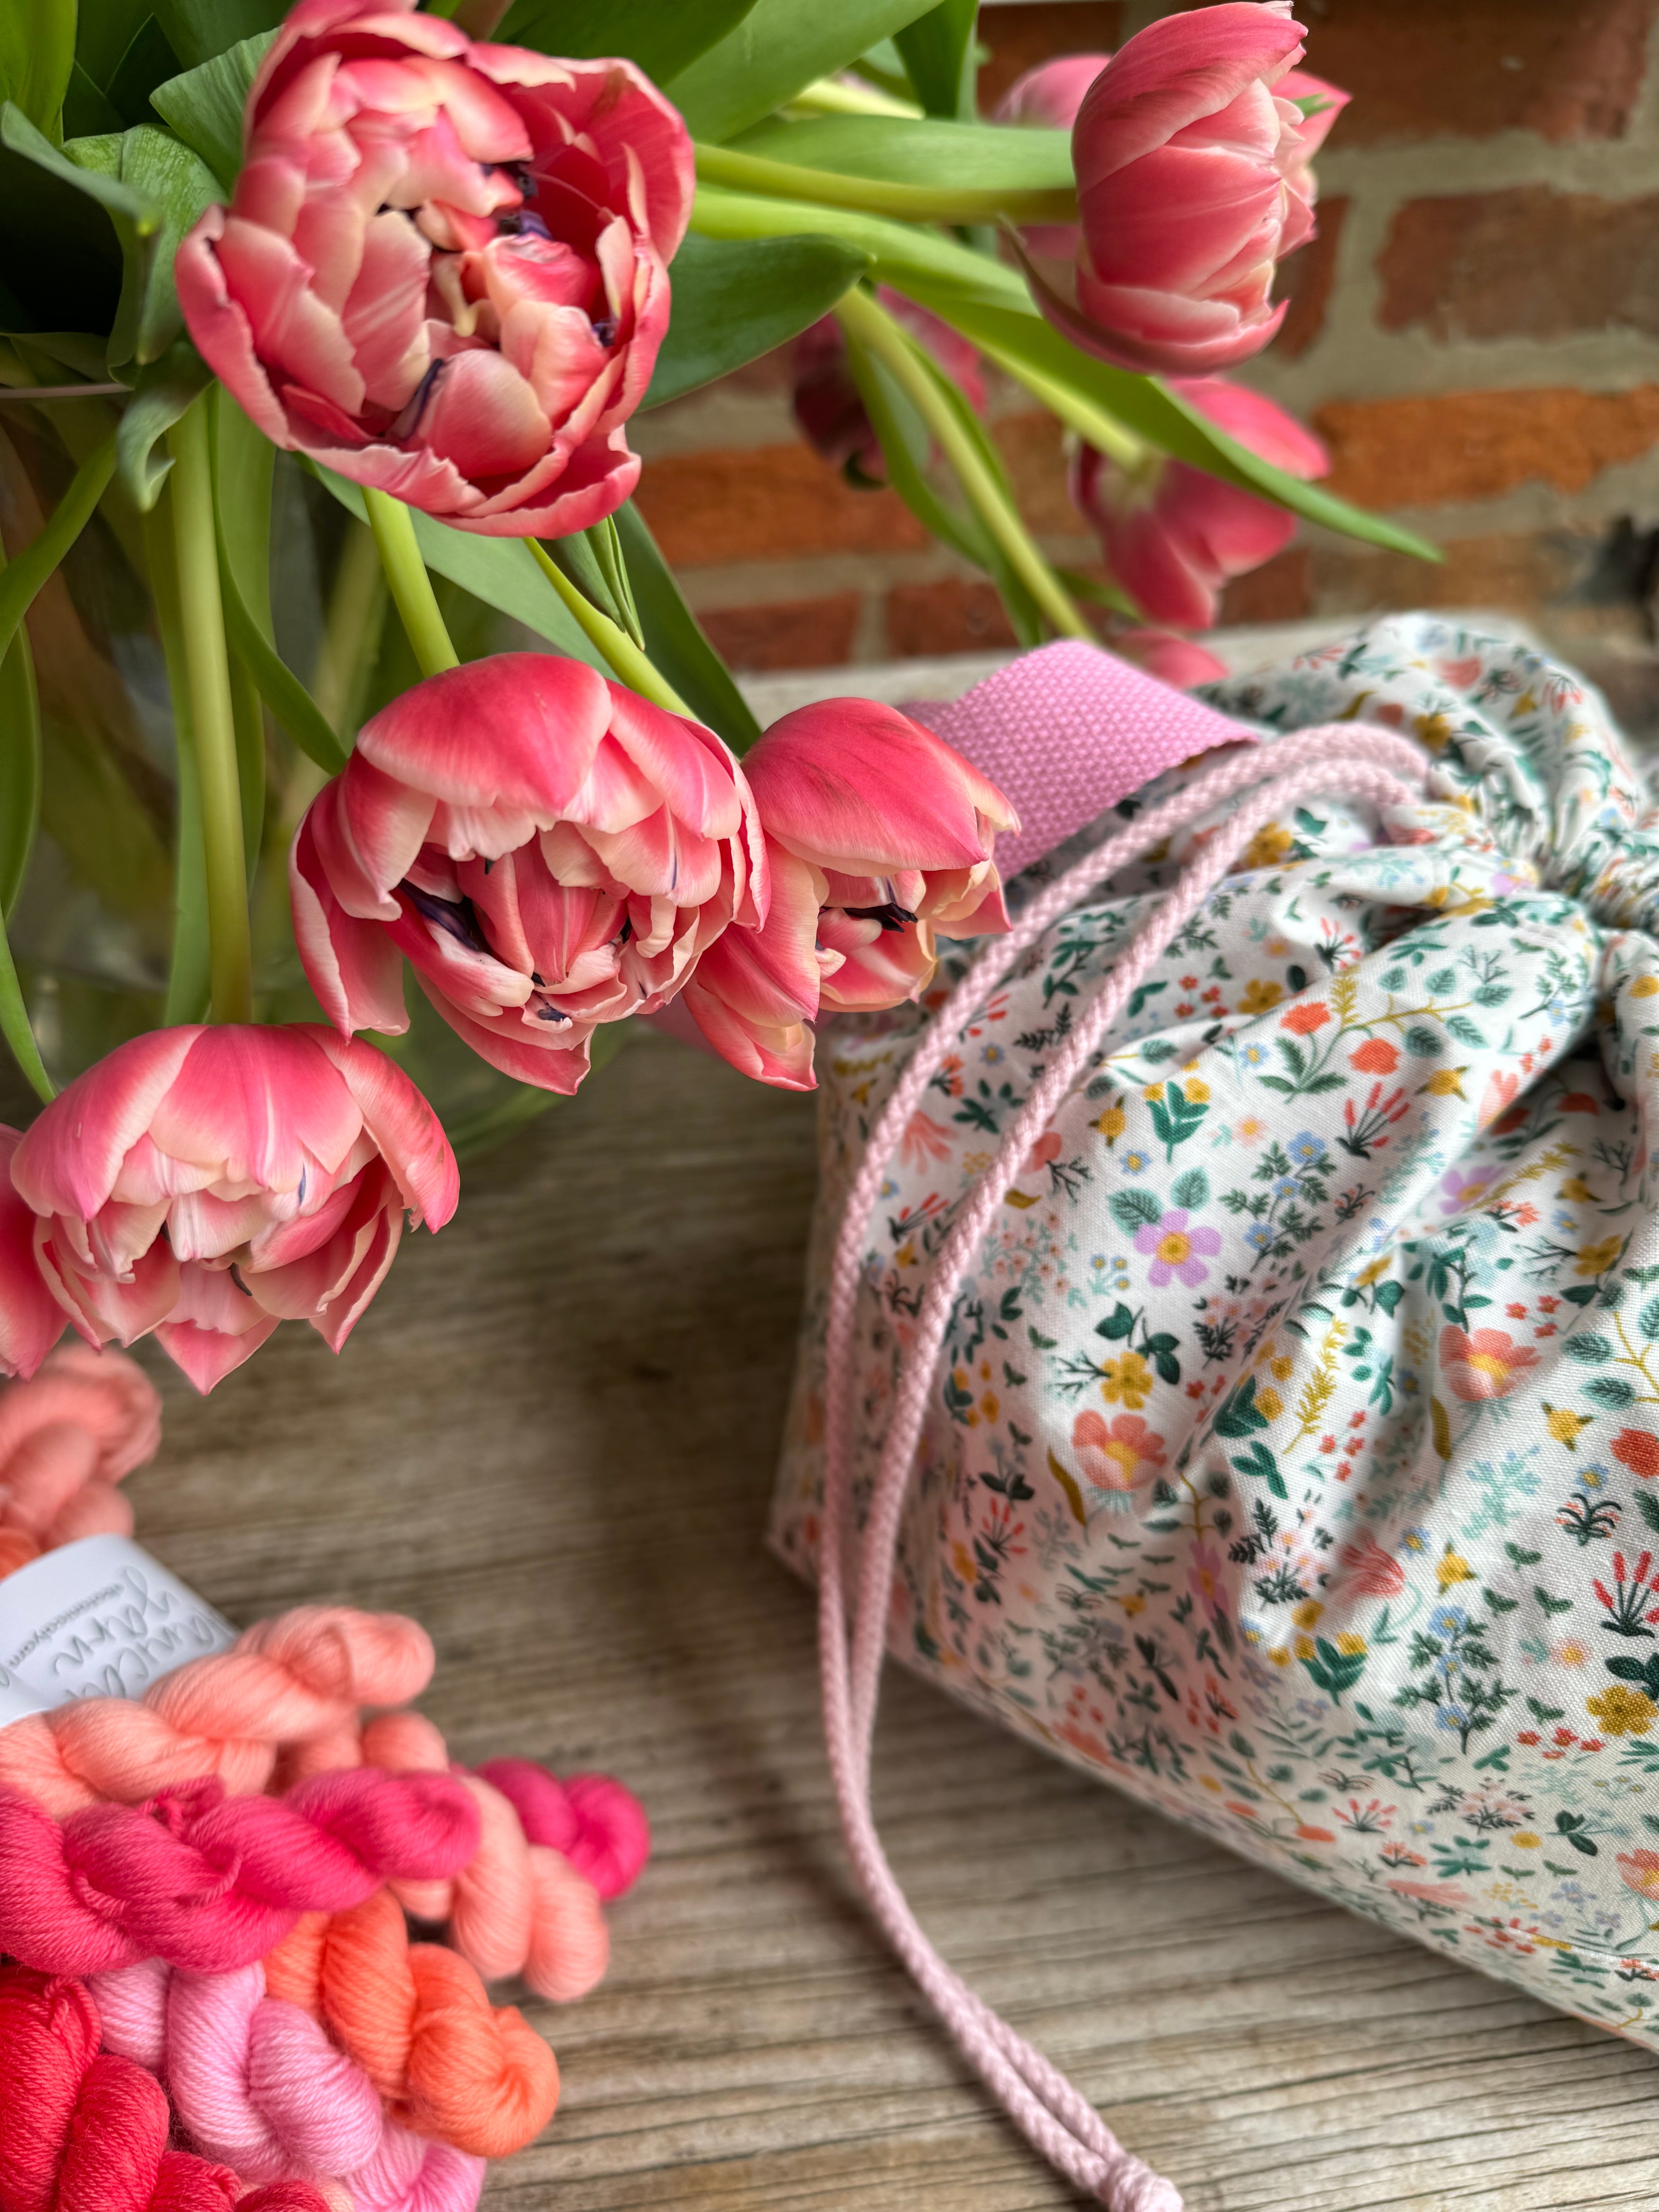 Made to order - Project Bag Style 01 - Delicate Meadow Floral